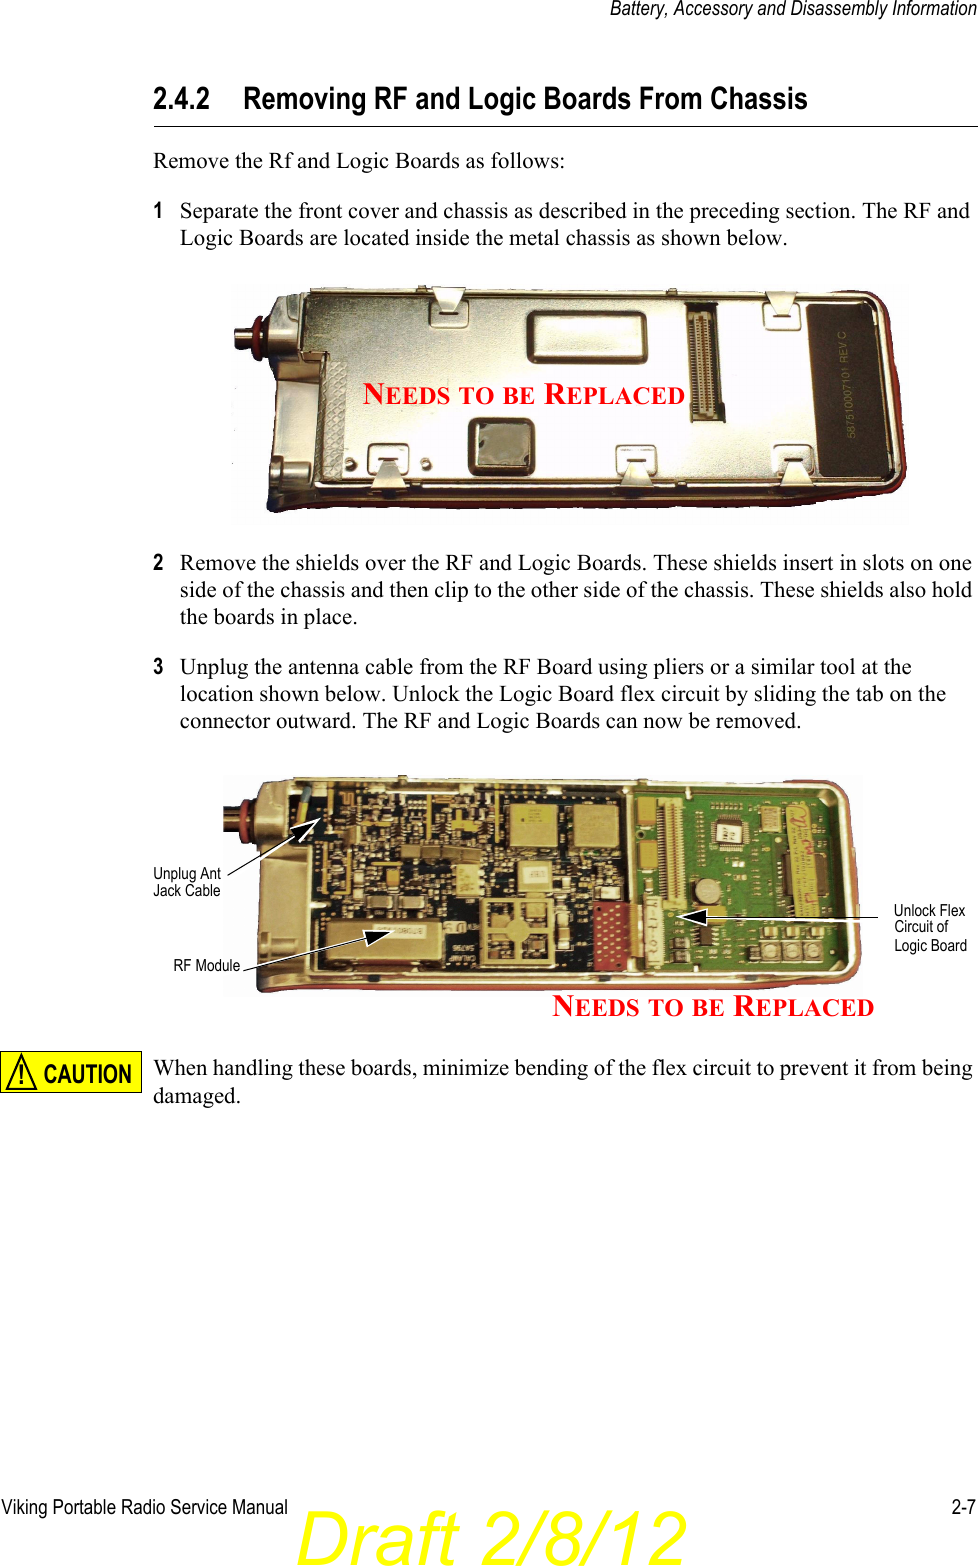 Draft 2/8/12Viking Portable Radio Service Manual 2-7Battery, Accessory and Disassembly Information2.4.2 Removing RF and Logic Boards From ChassisRemove the Rf and Logic Boards as follows:1Separate the front cover and chassis as described in the preceding section. The RF and Logic Boards are located inside the metal chassis as shown below.2Remove the shields over the RF and Logic Boards. These shields insert in slots on one side of the chassis and then clip to the other side of the chassis. These shields also hold the boards in place.3Unplug the antenna cable from the RF Board using pliers or a similar tool at the location shown below. Unlock the Logic Board flex circuit by sliding the tab on the connector outward. The RF and Logic Boards can now be removed.When handling these boards, minimize bending of the flex circuit to prevent it from being damaged.NEEDS TO BE REPLACEDUnlock FlexUnplug AntJack CableCircuit of RF ModuleLogic BoardNEEDS TO BE REPLACEDCAUTION!